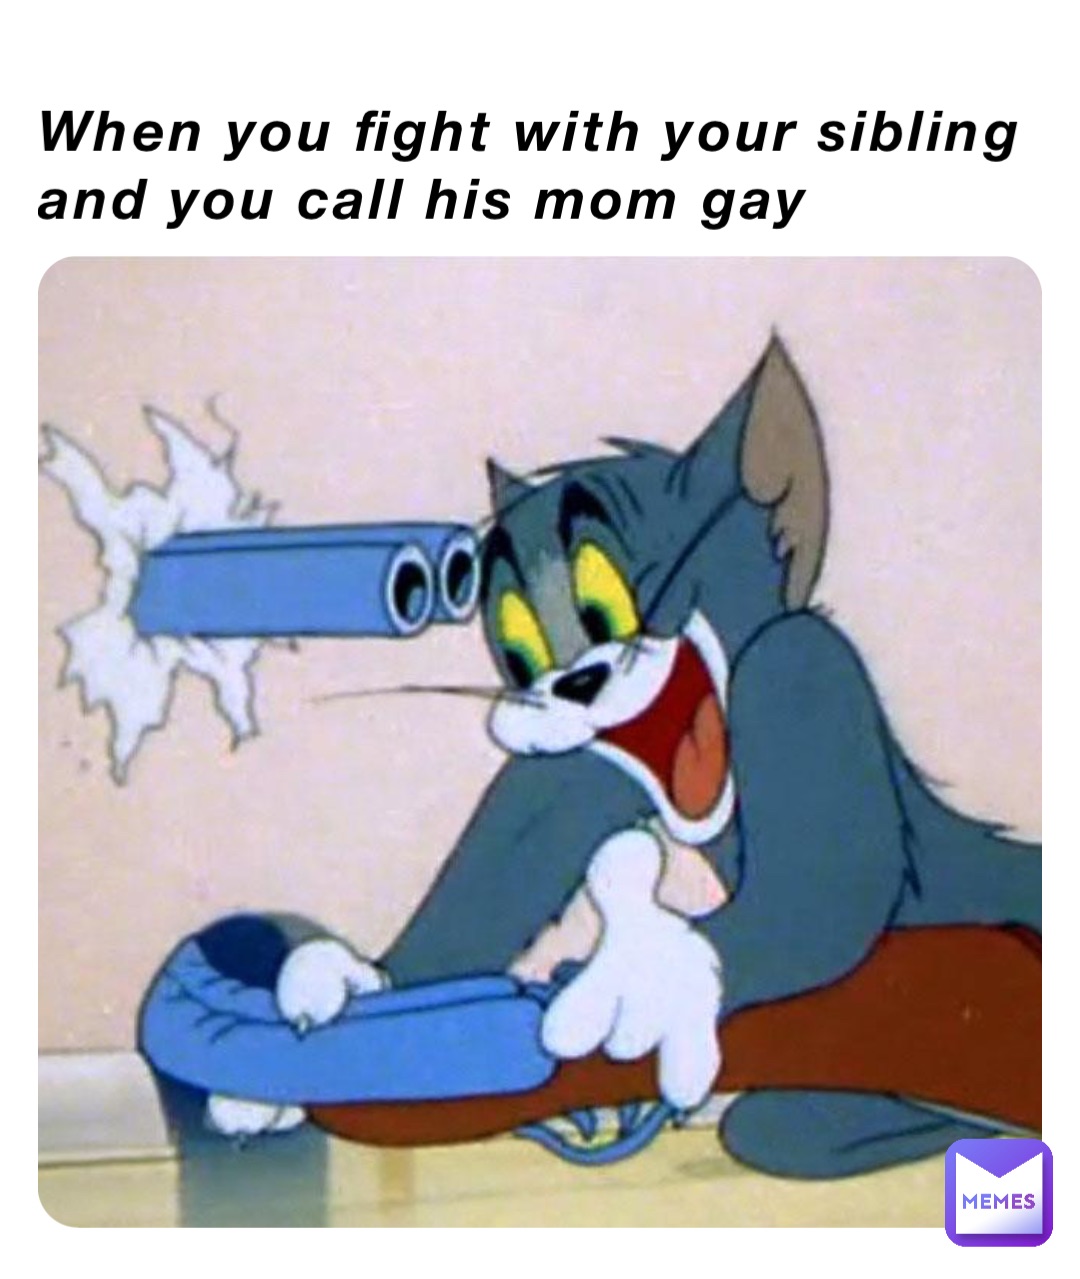 When you fight with your sibling and you call his mom gay